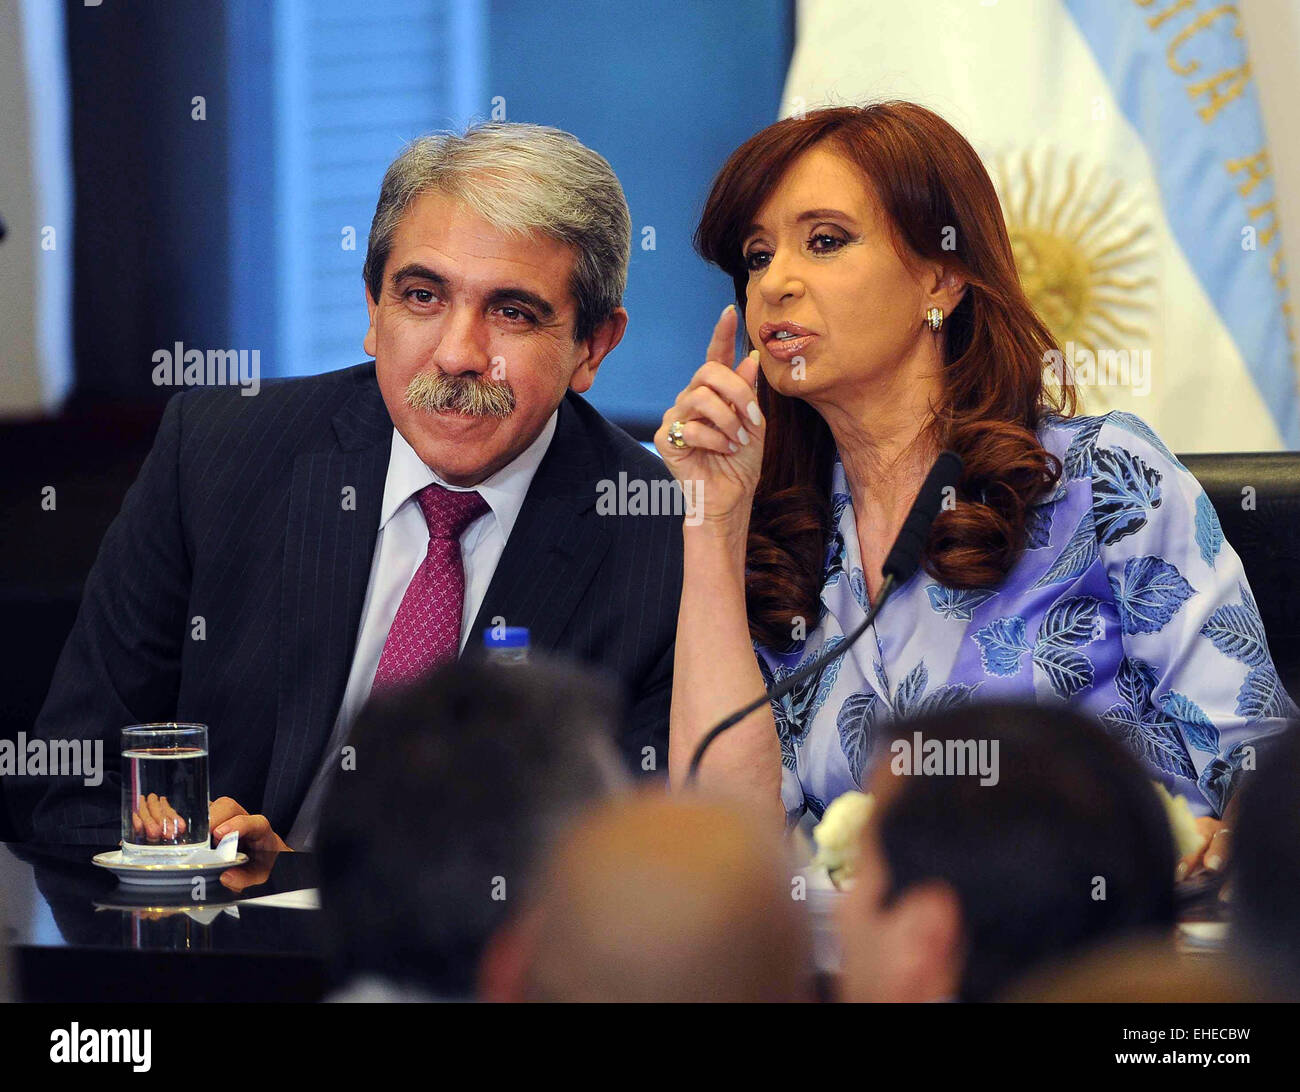 Buenos Aires, Argentina. 12th Mar, 2015. Argentina's President Cristina Fernandez (R) talks with Anibal Fernandez (L), head of Ministers Cabinet, during an act at Casa Rosada, in Buenos Aires, Argentina, on March 12, 2015. Cristina Fernandez announced Thursday an increase in grants and scholarships for middle and high schools students, according to local press. © Raul Ferrari/TELAM/Xinhua/Alamy Live News Stock Photo